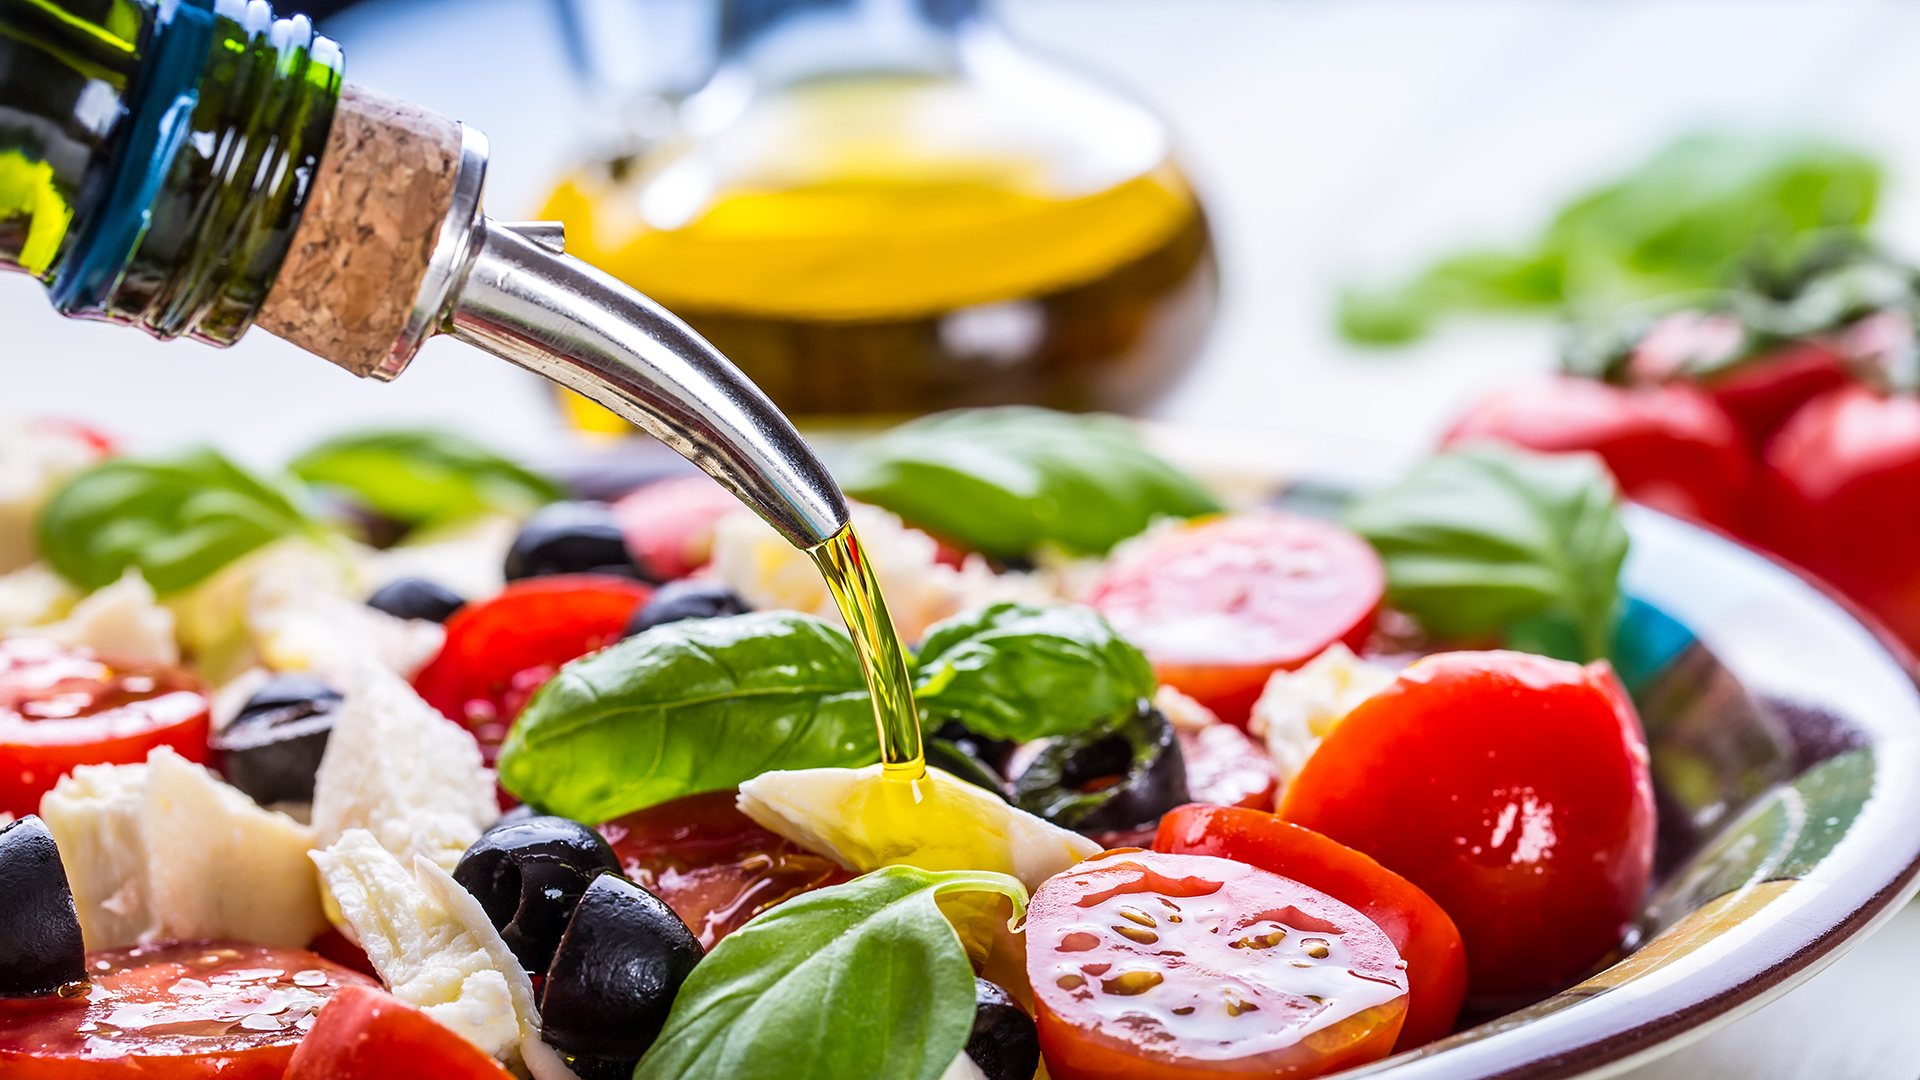 A Mediterranean diet can reduce the risk of cardiovascular disease in women